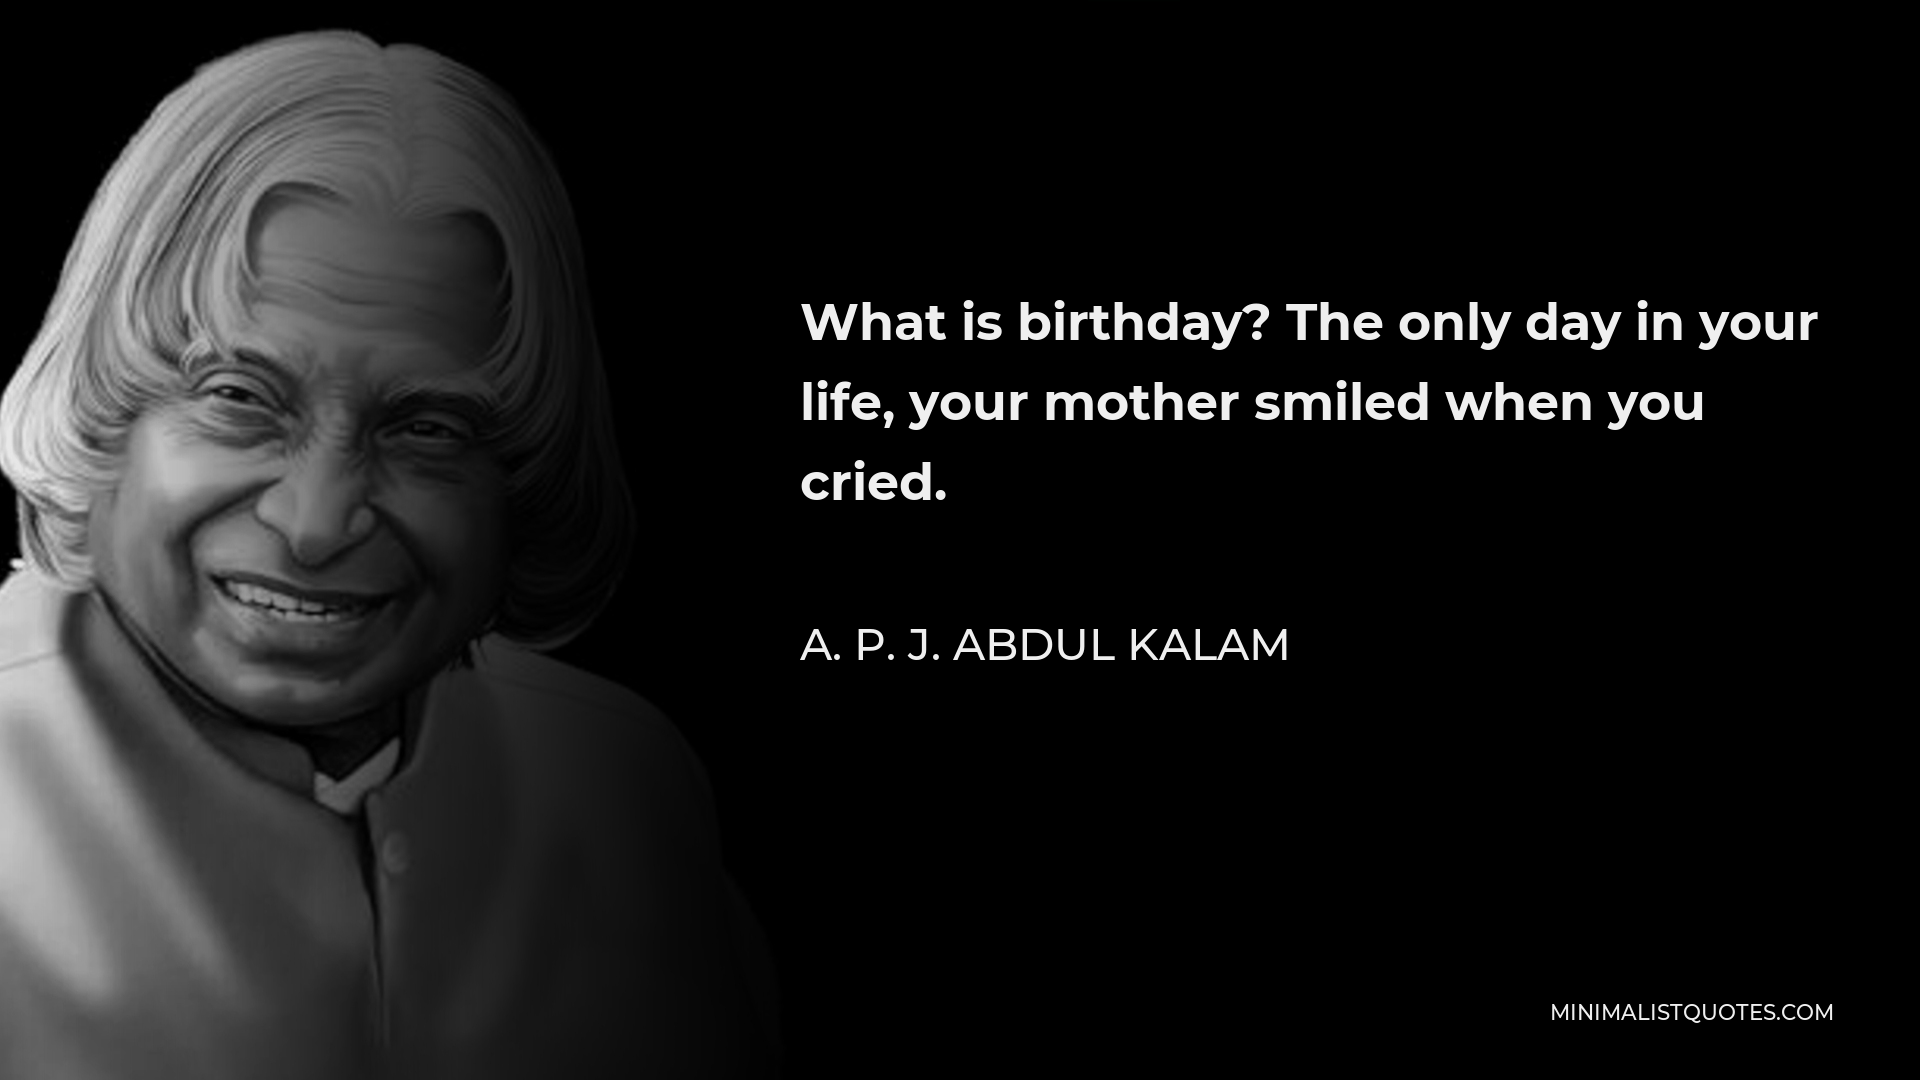 A. P. J. Abdul Kalam Quote - What is birthday? The only day in your life, your mother smiled when you cried.